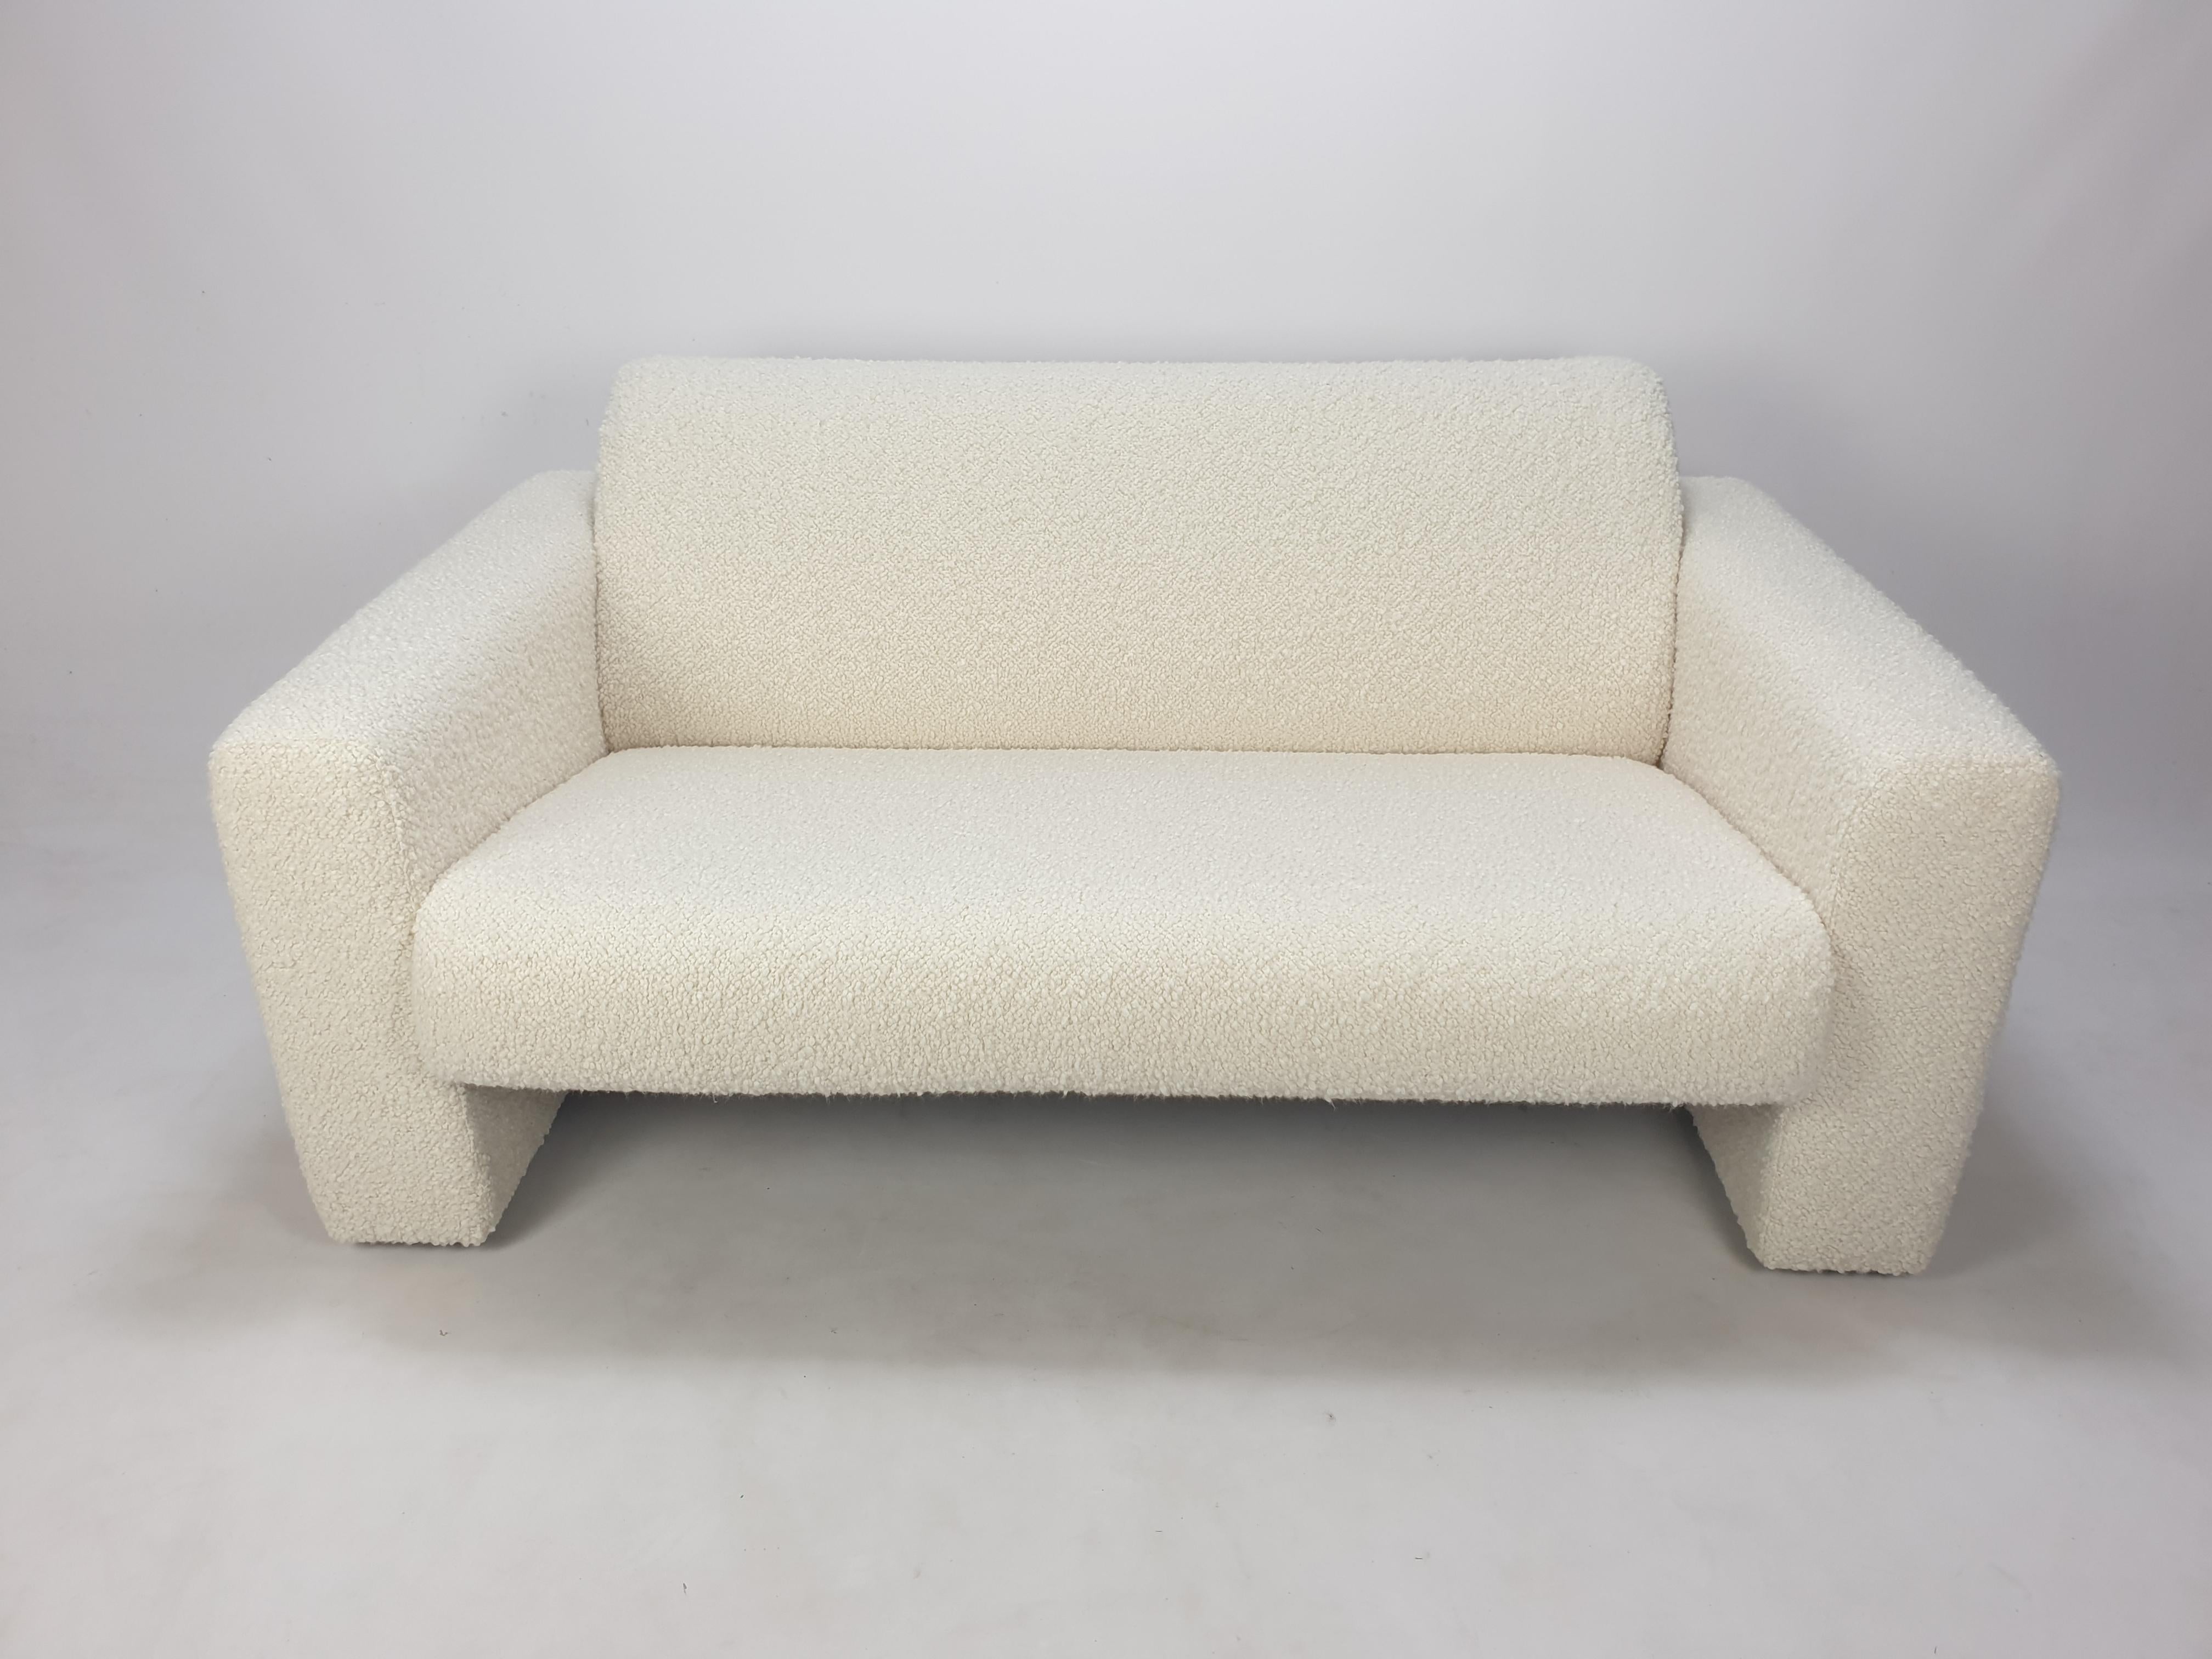 Very nice 2-seat sofa, designed by the Artifort Design Group in 1987.
It is a very solid sofa, made with the best materials.
The metal tube makes it a very nice object from the back side.

This lovely sofa is just restored with new Italian